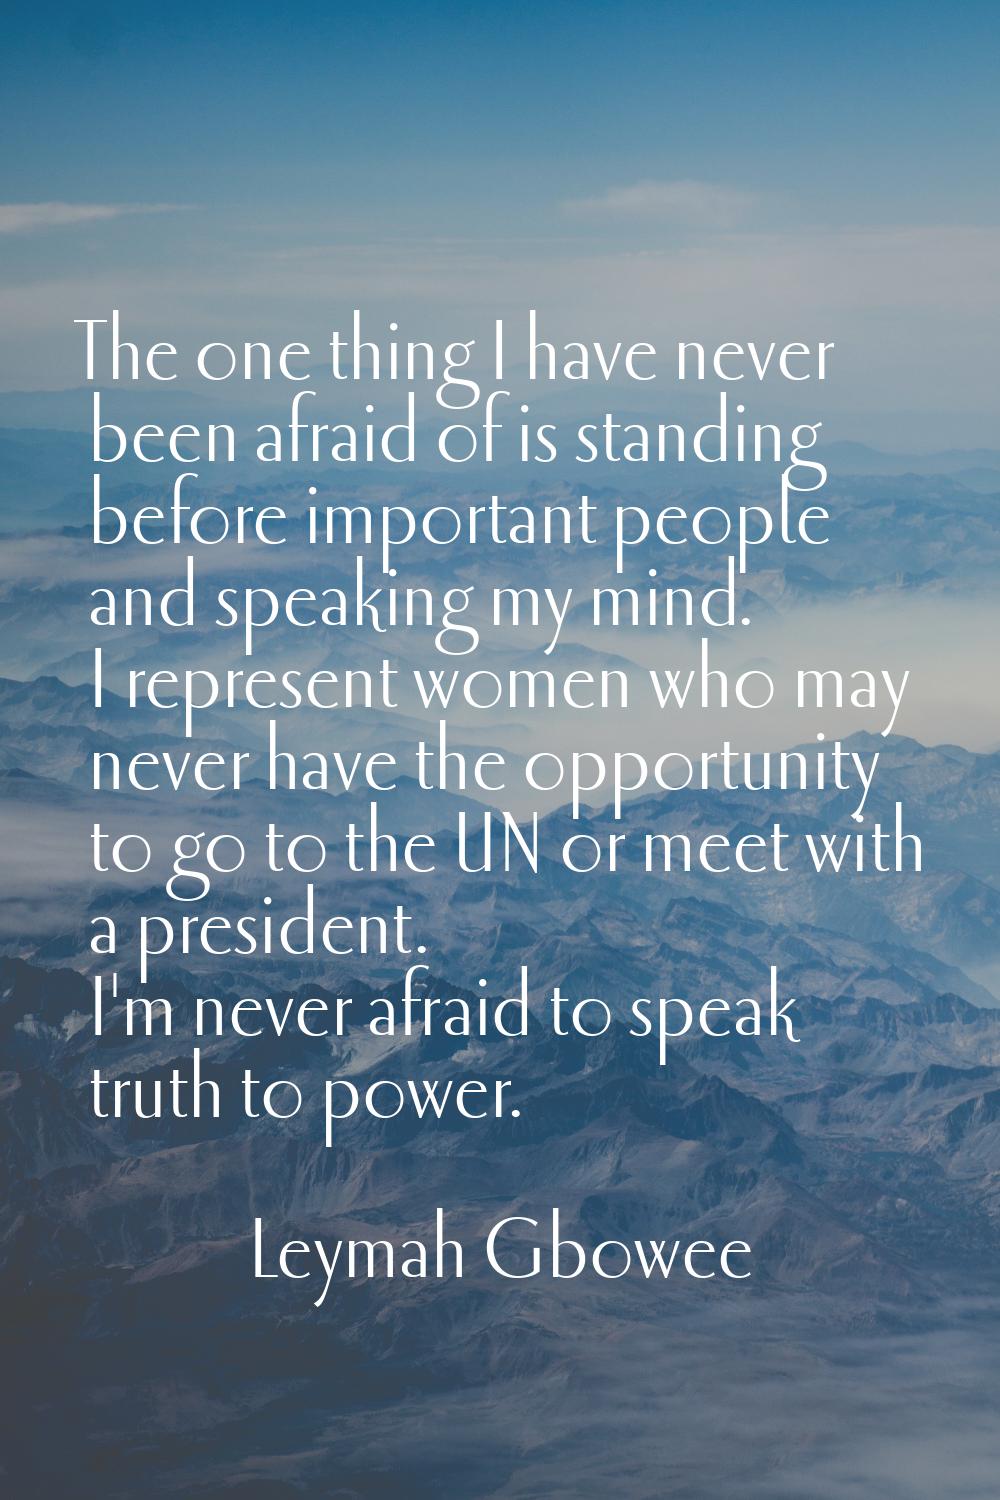 The one thing I have never been afraid of is standing before important people and speaking my mind.